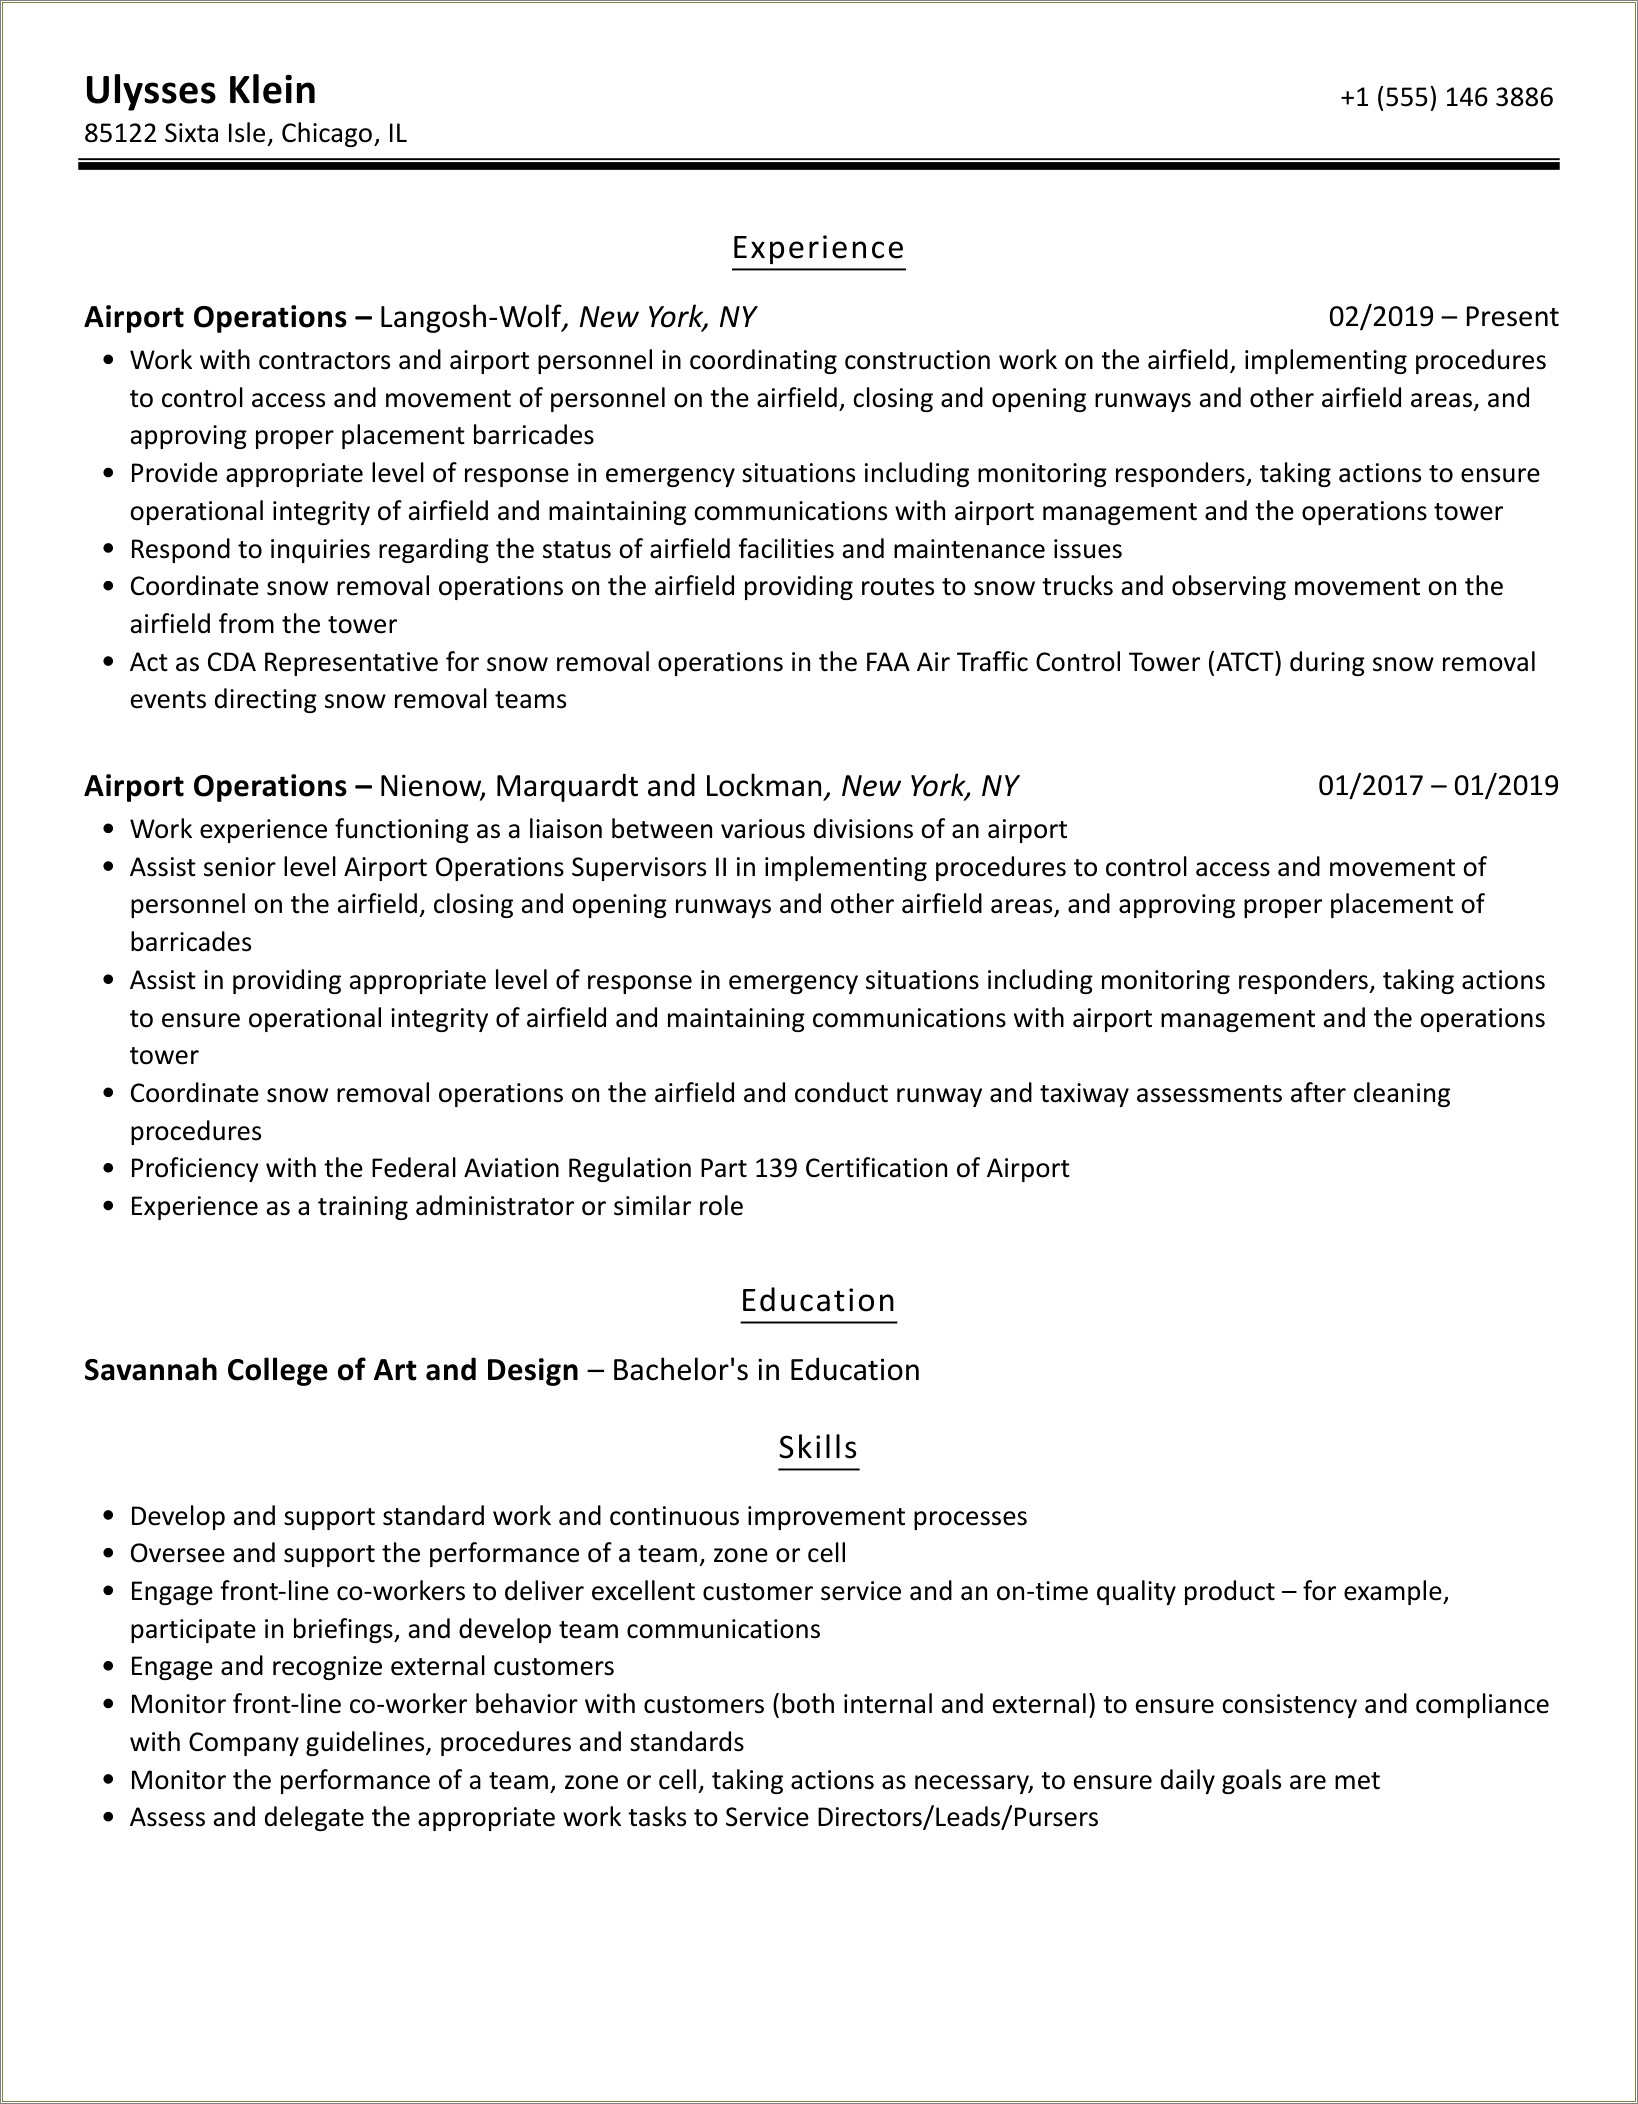 Sample Resume Of Ops Position For Airline